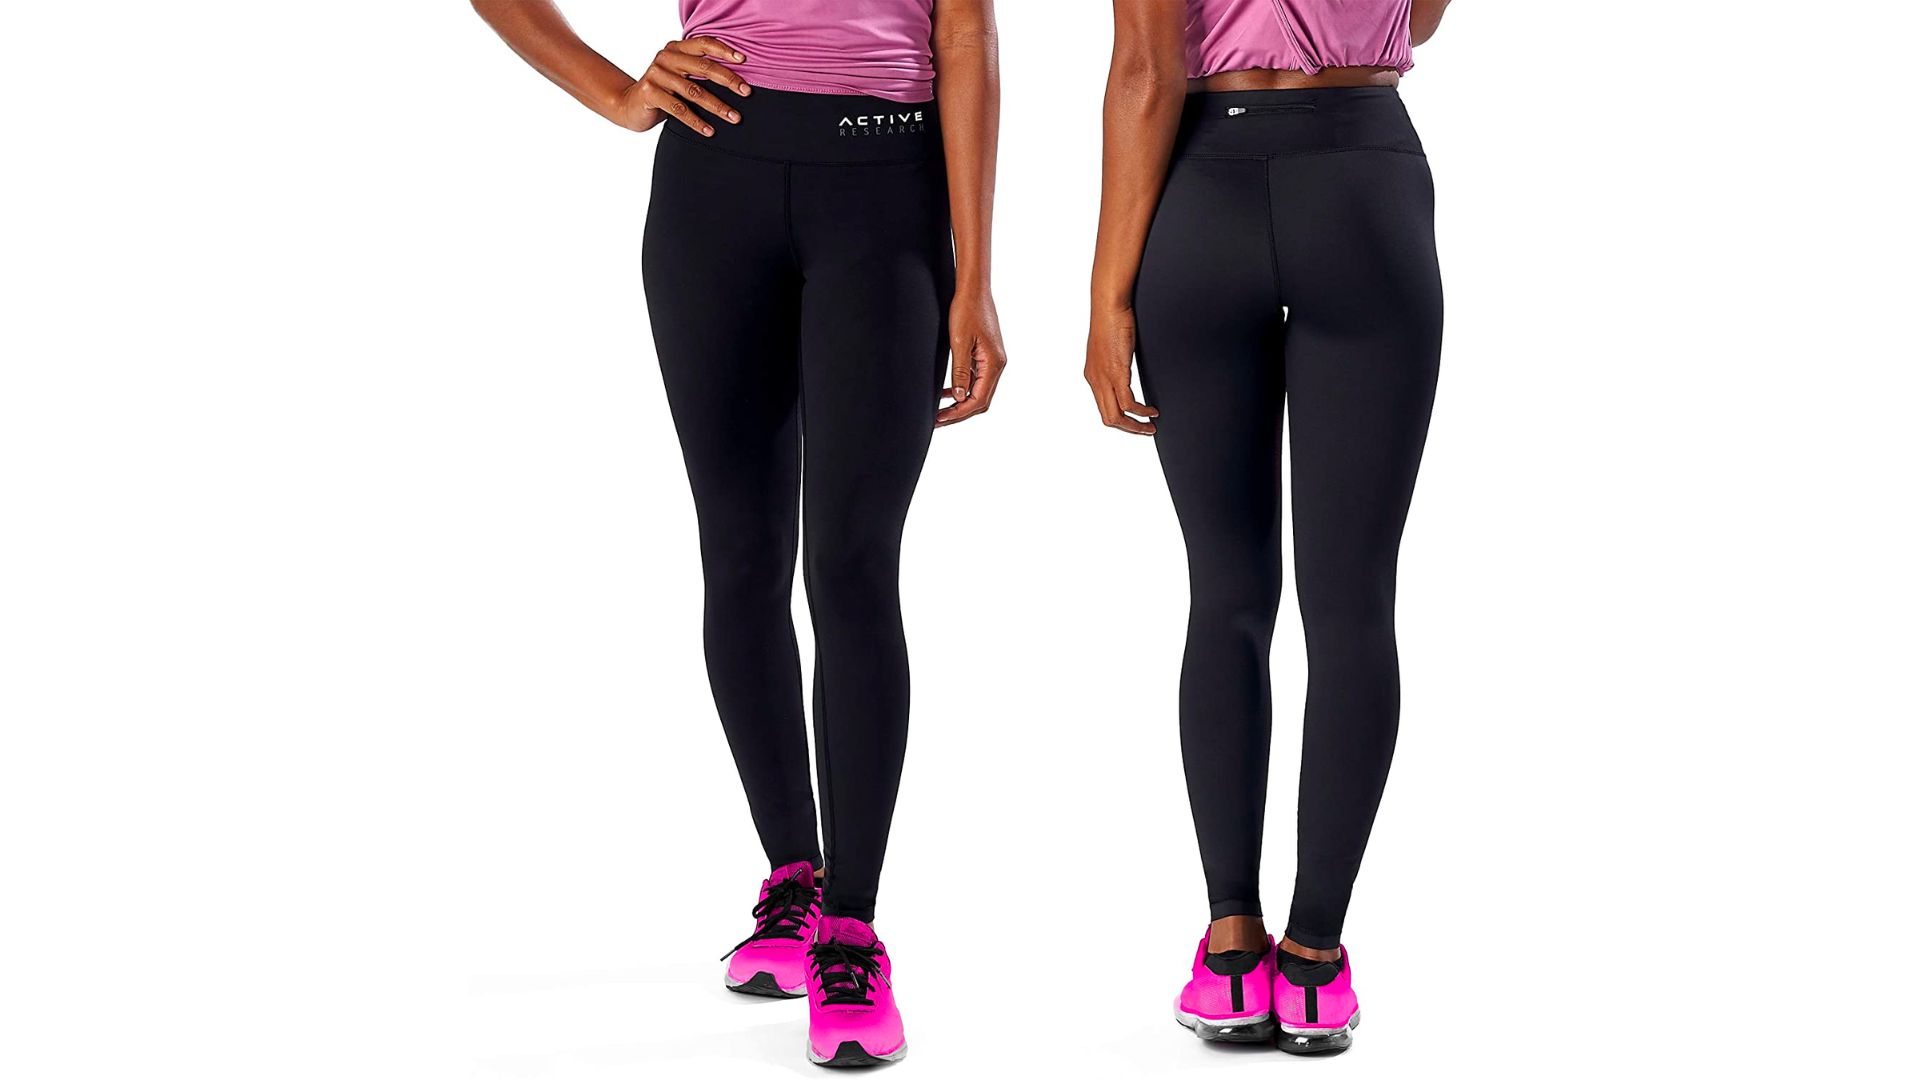 Best Workout Clothes For Women Over 50